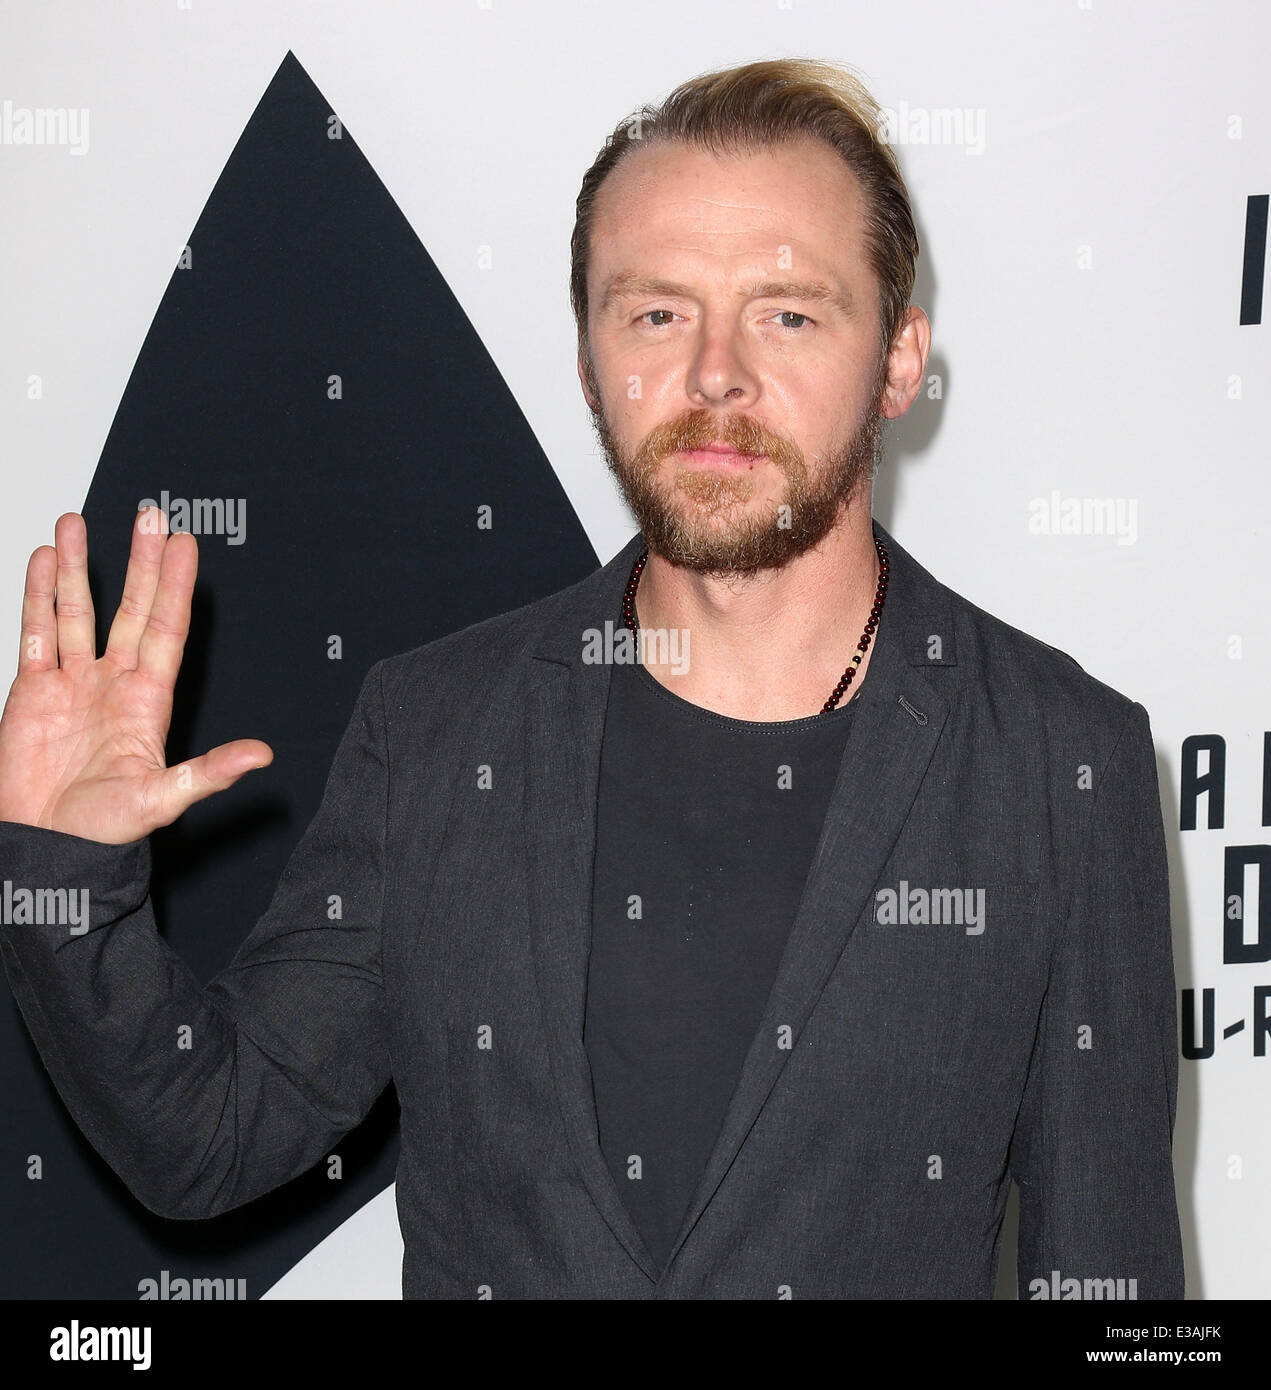 Celebrities attend STAR TREK INTO DARKNESS Blu-ray and DVD debut at California Science Center.  Featuring: Simon Pegg Where: Los Angeles, CA, United States When: 11 Sep 2013an To/WENN.com Stock Photo